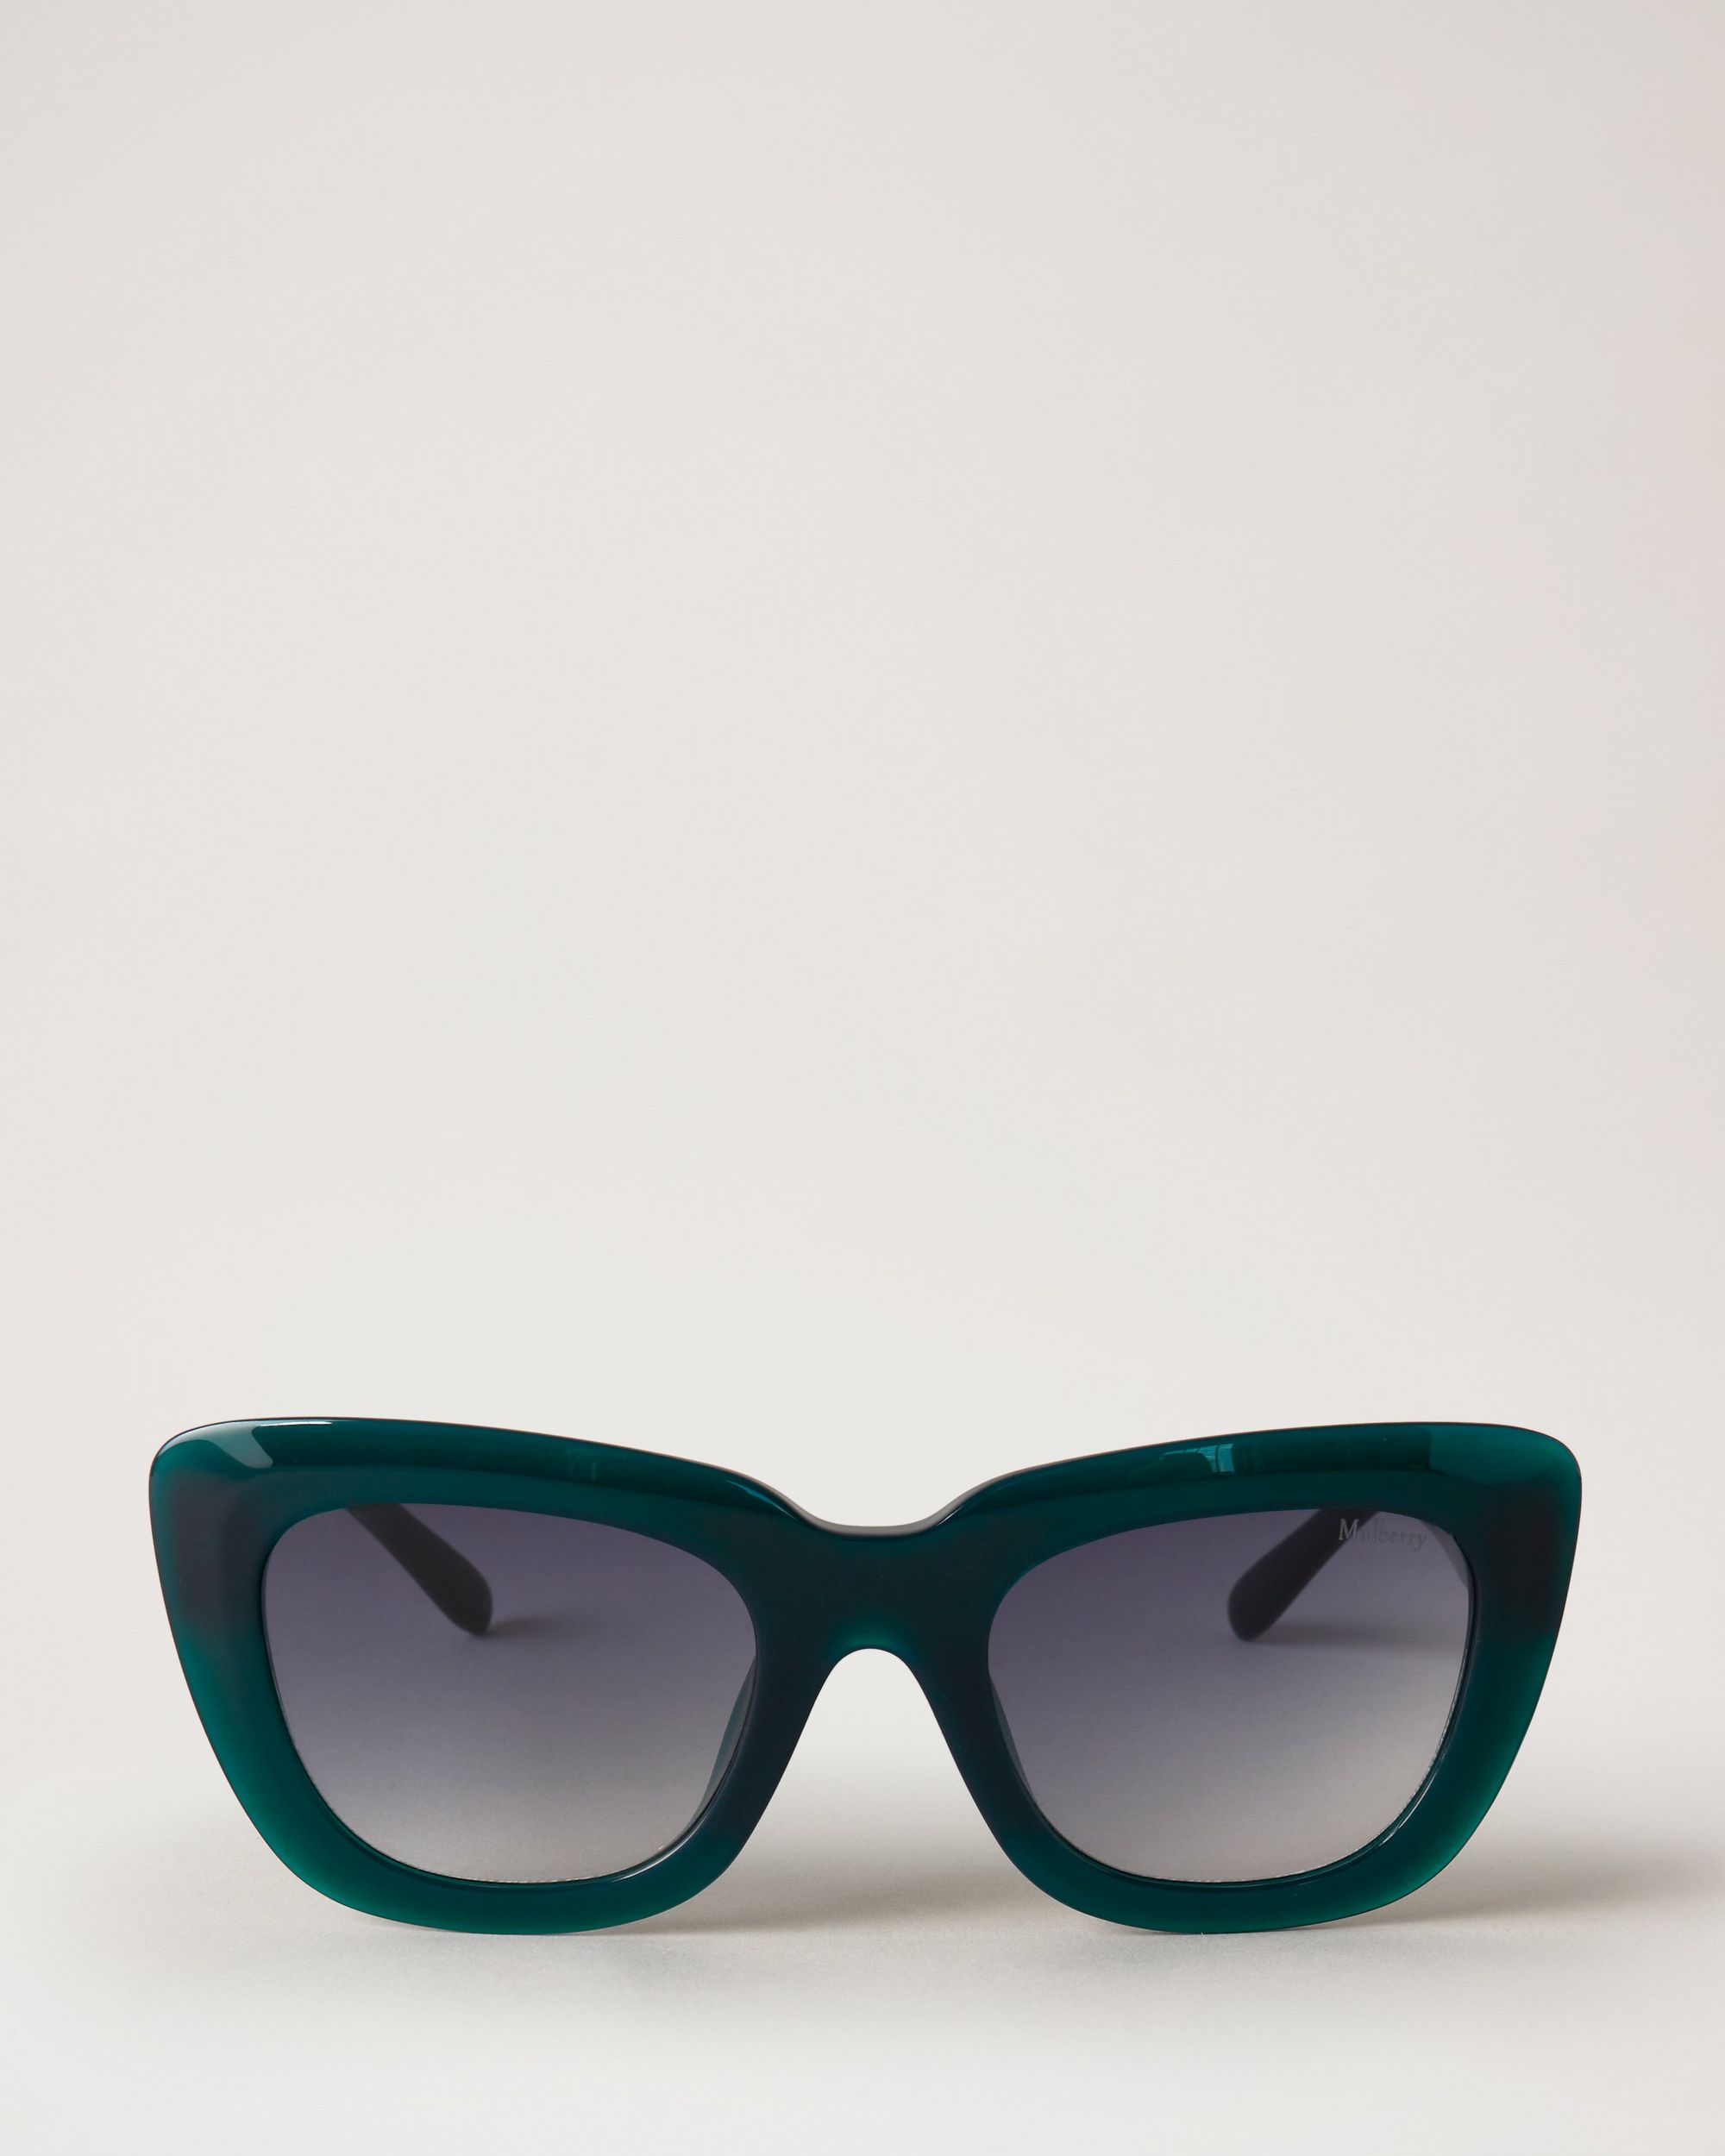 Green frame sunglasses with black glass